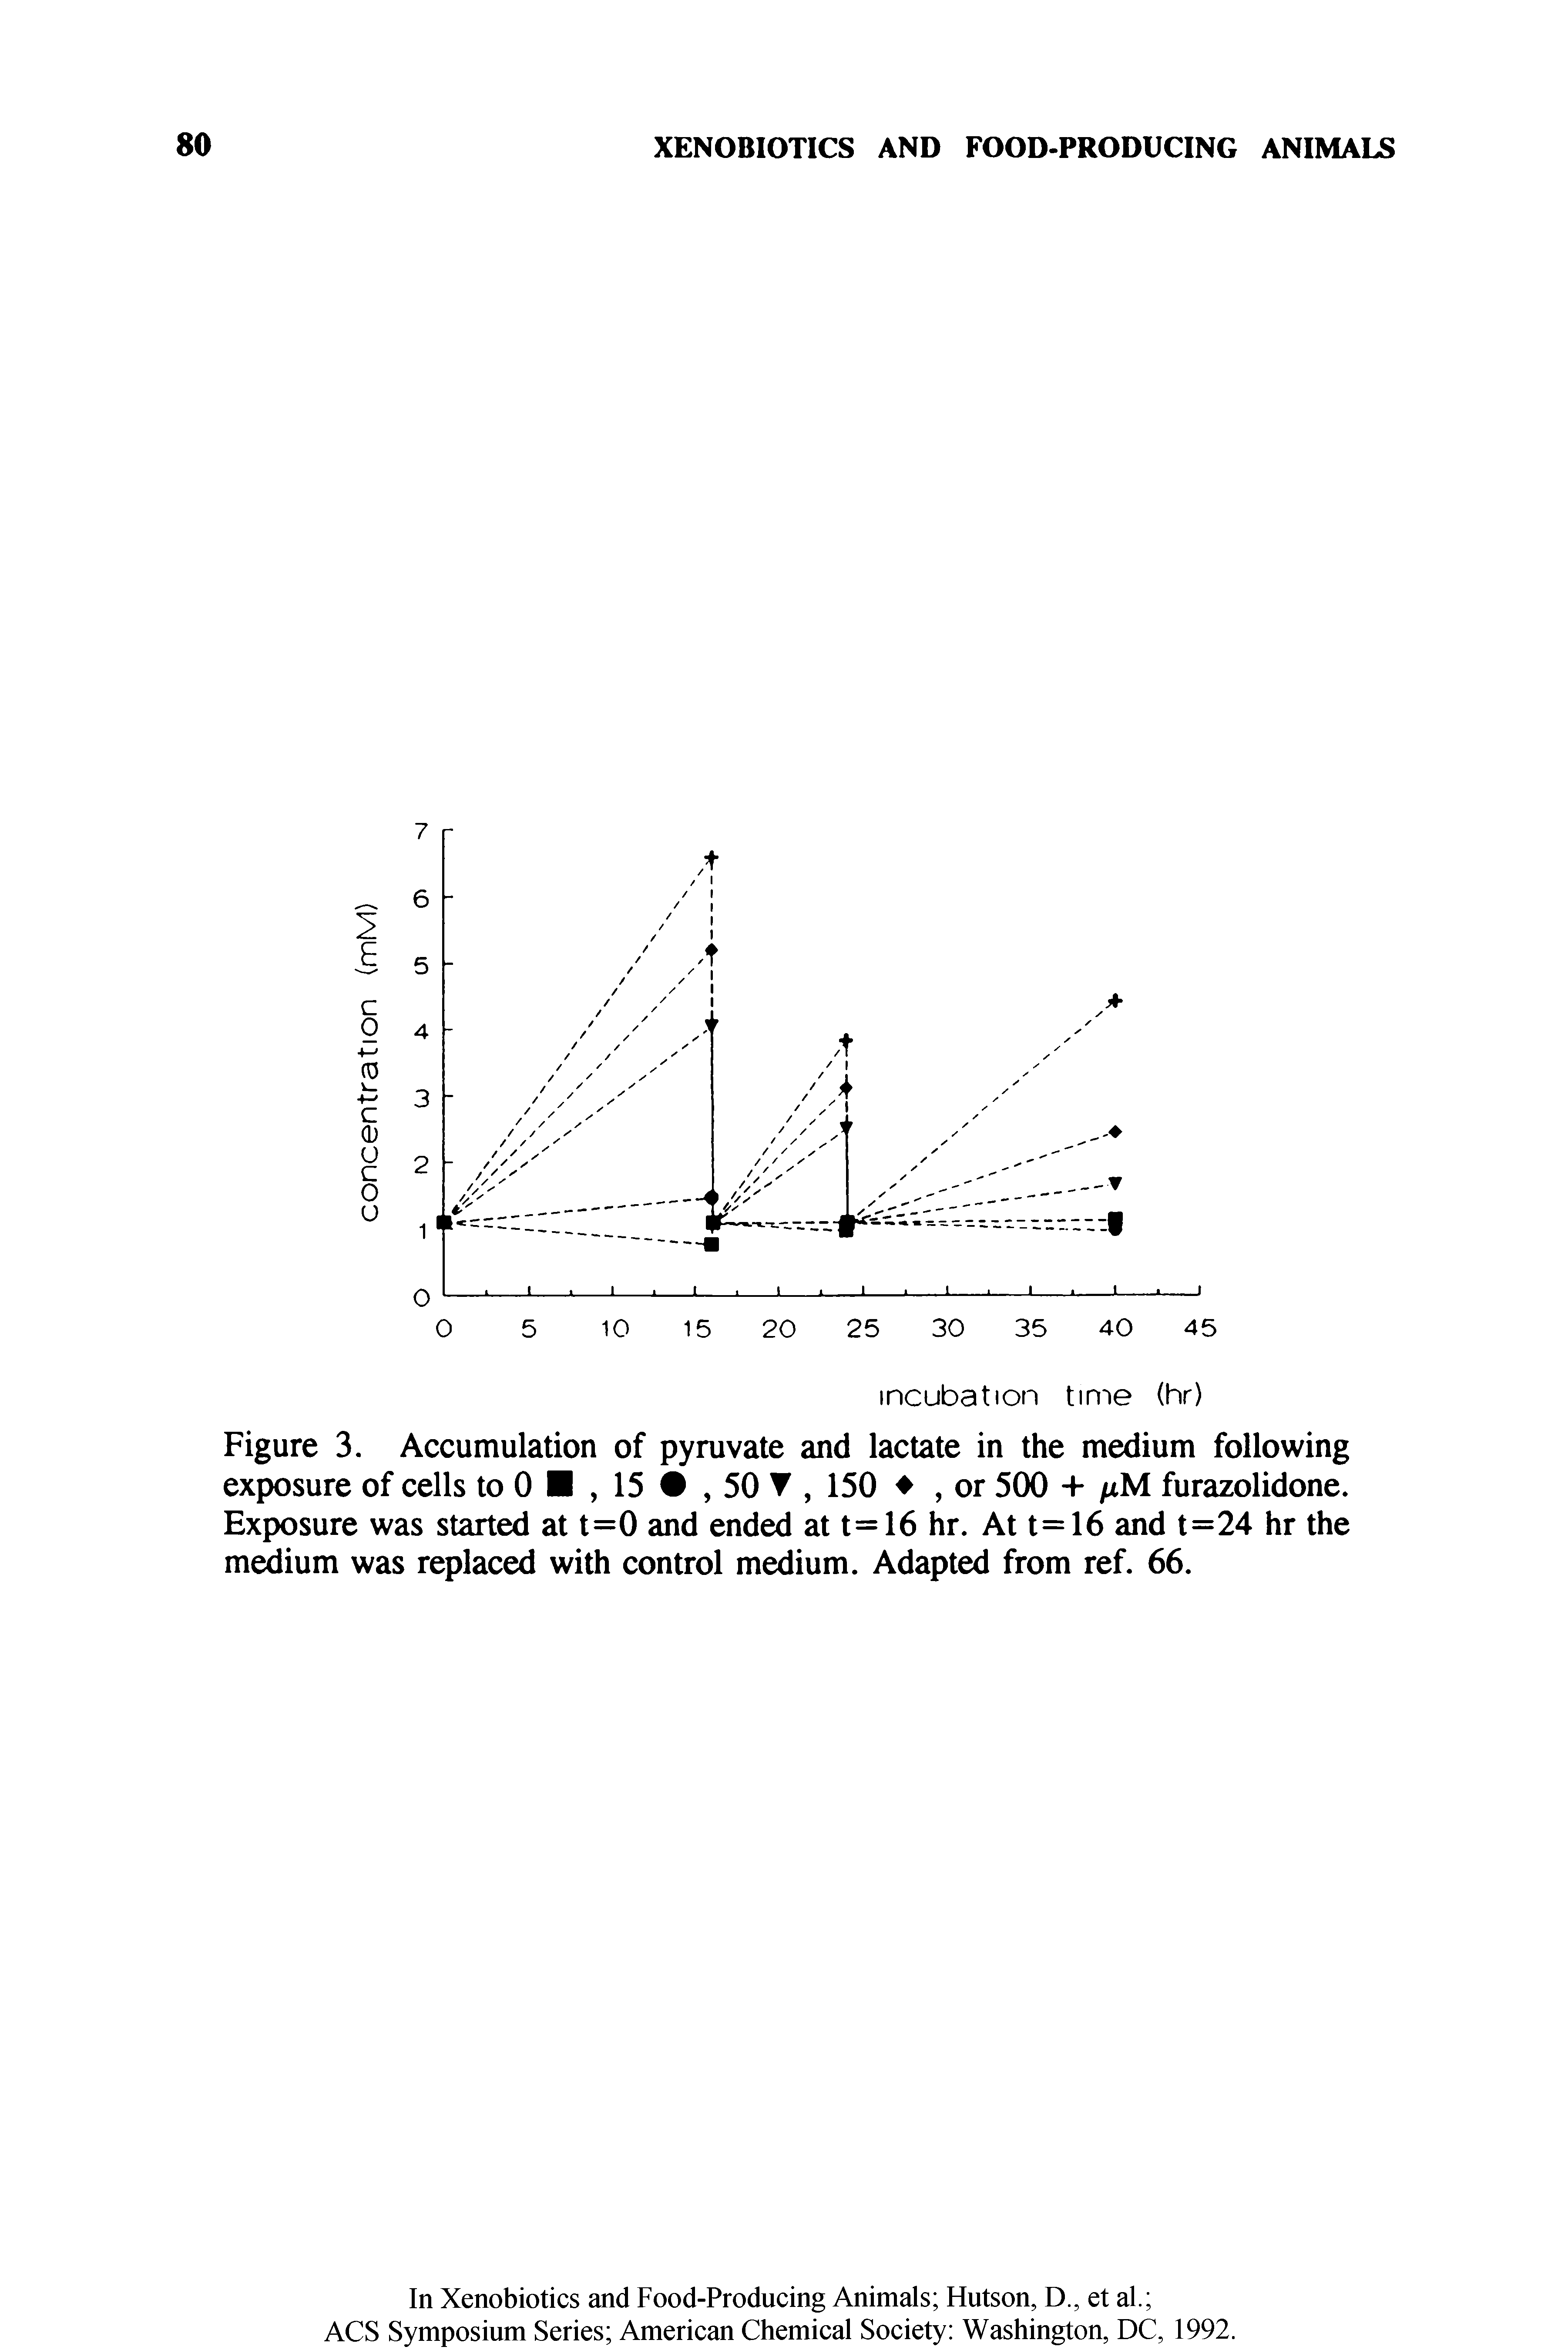 Figure 3. Accumulation of pyruvate and lactate in the medium following exposure of cells to 0 , 15 , 50 T, 150 , or 500 + /iM furazolidone. Exposure was started at t=0 and ended at t=16 hr. At t=16 and t=24 hr the medium was replaced with control medium. Adapted from ref. 66.